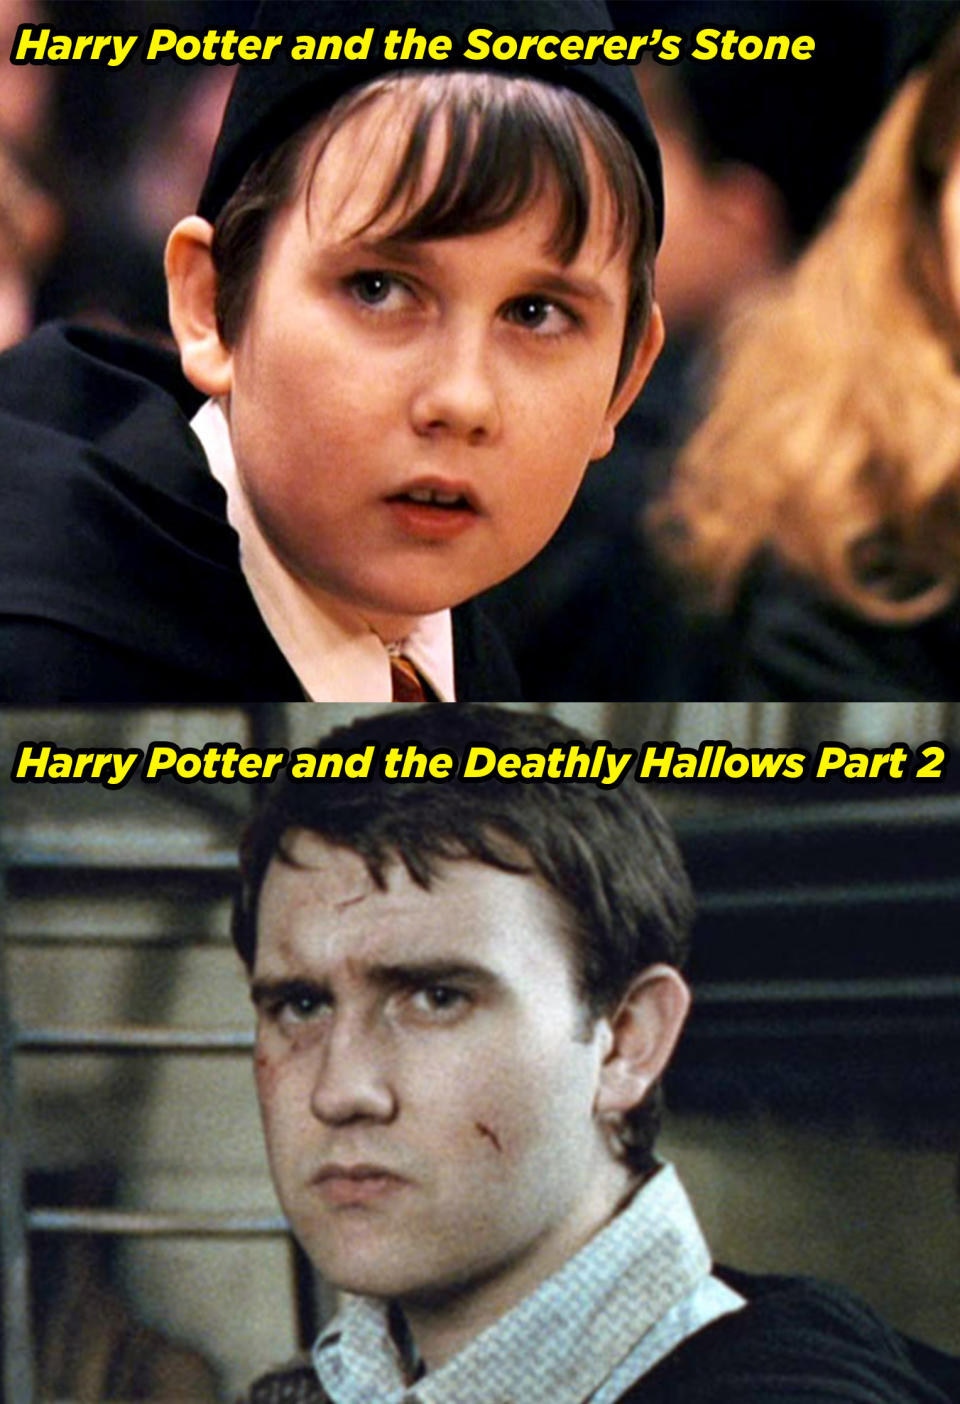 Matthew Lewis in the Sorcerer's Stone and Deathly Hallows Part 2